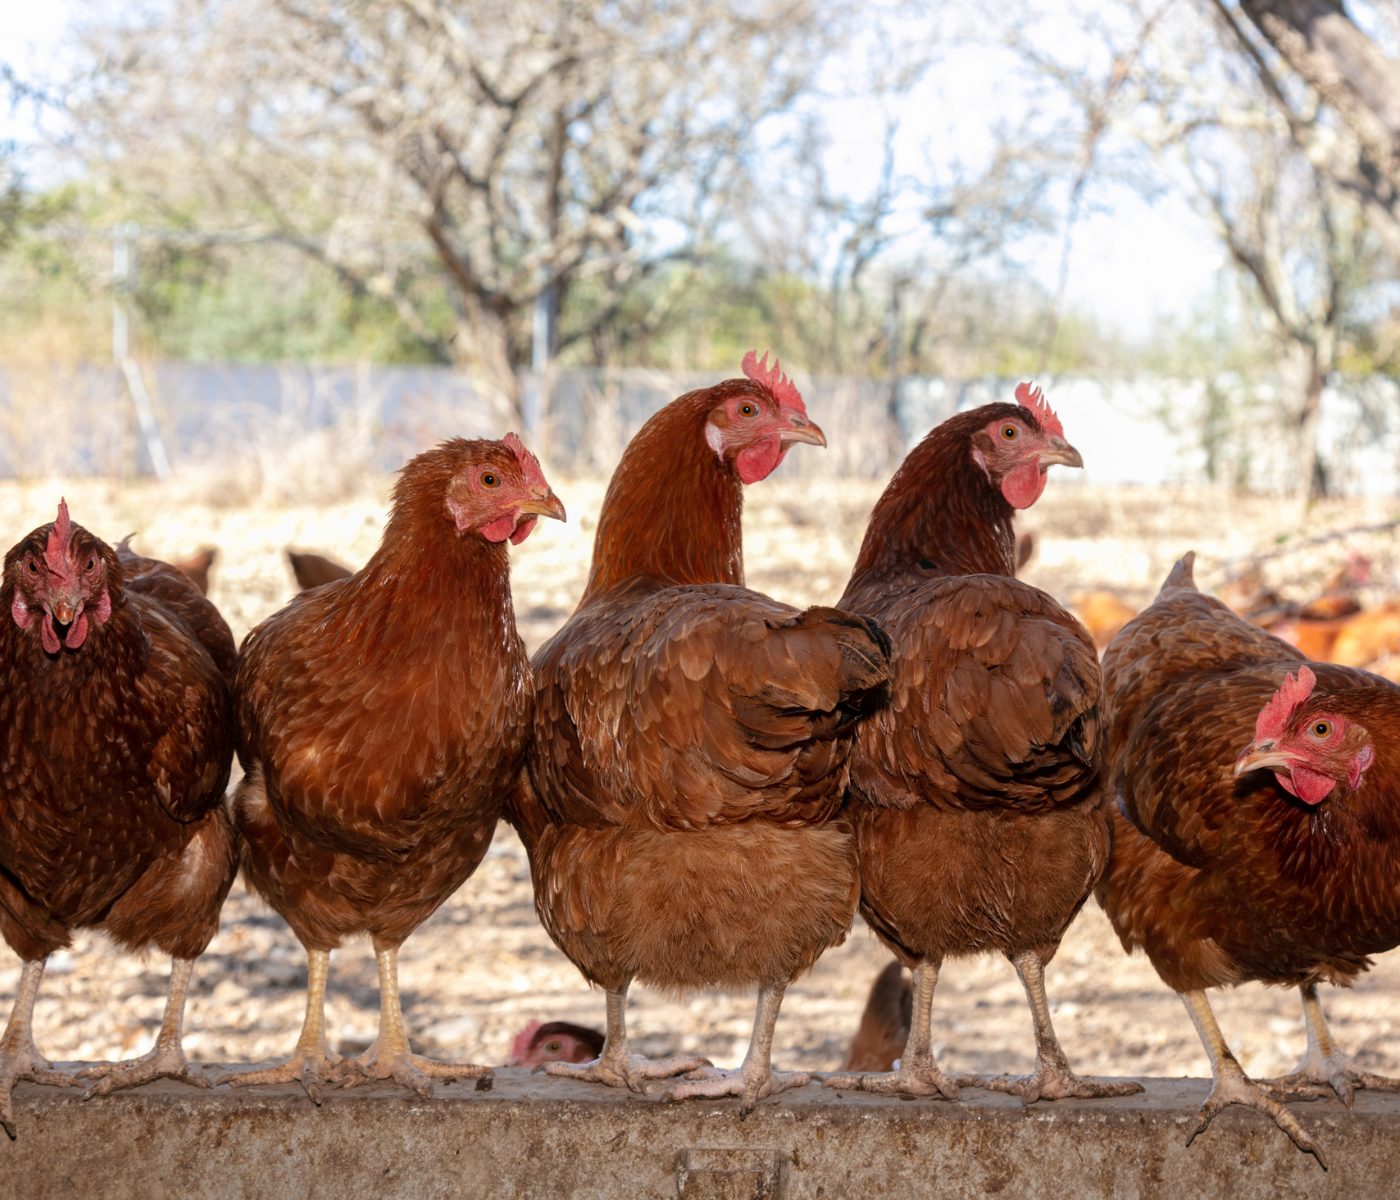 Laying hens’ nutrition. What are some of its critical points?